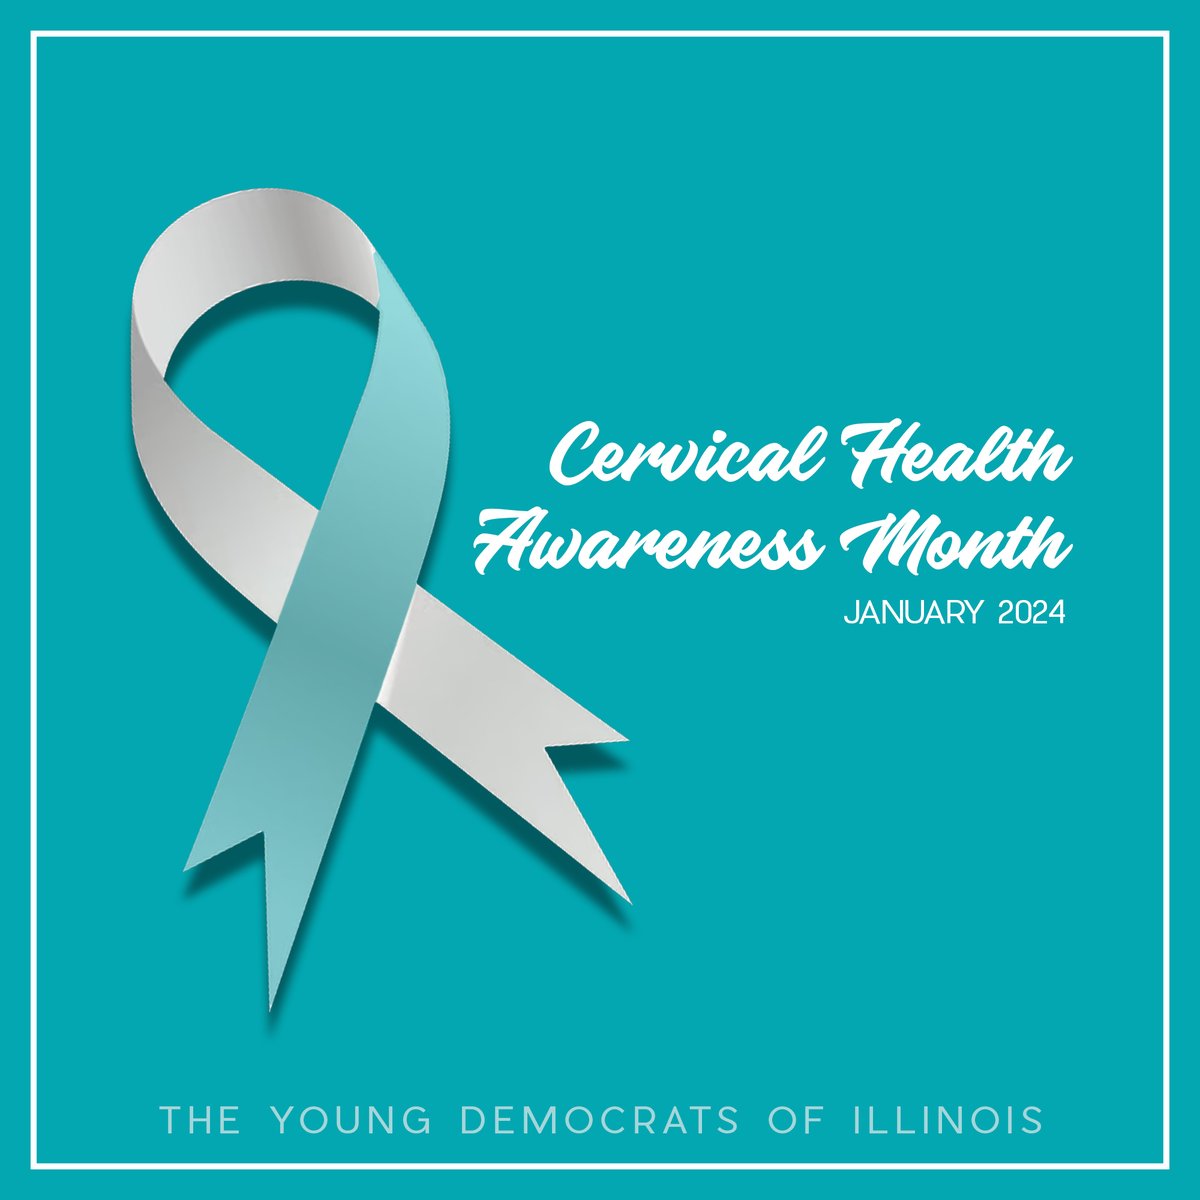 It's #CervicalHealthAwarenessMonth! Stay on top of your health with regular Pap tests & consider the HPV vaccine. Early detection & prevention are key. Talk to your healthcare provider today!